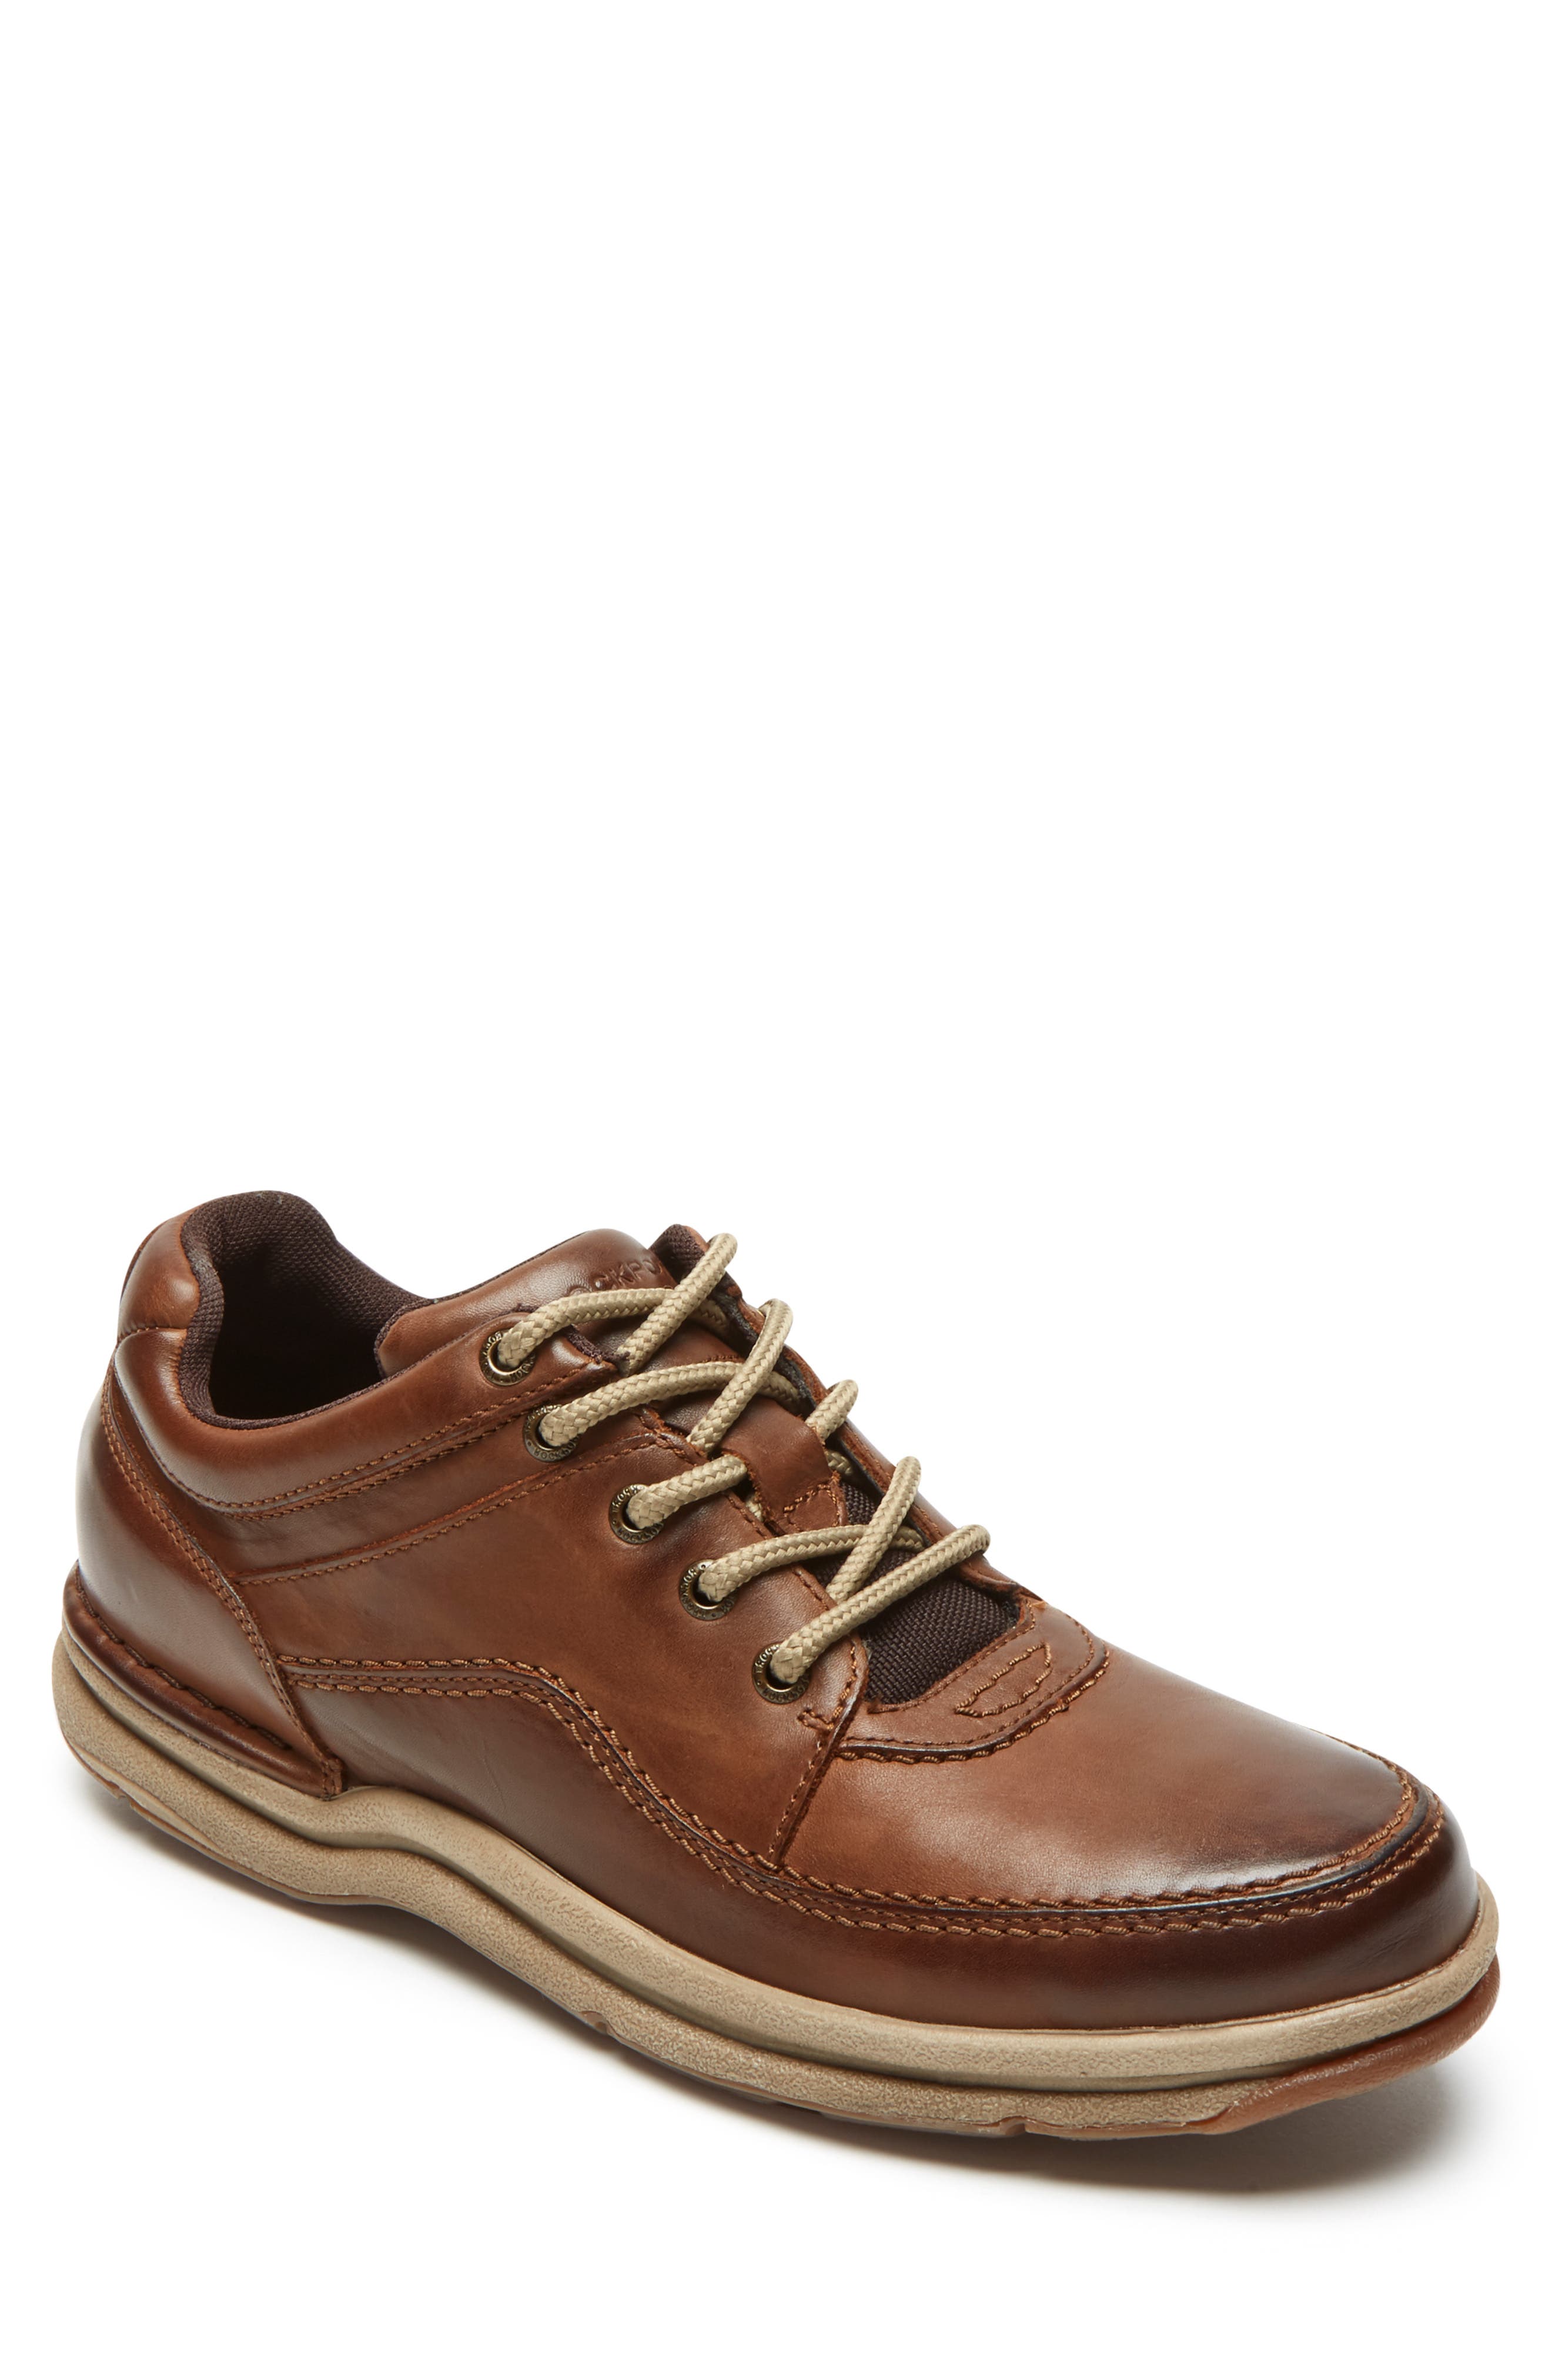 Rockport 'World Tour Classic' Oxford in Chocolate | Smart Closet